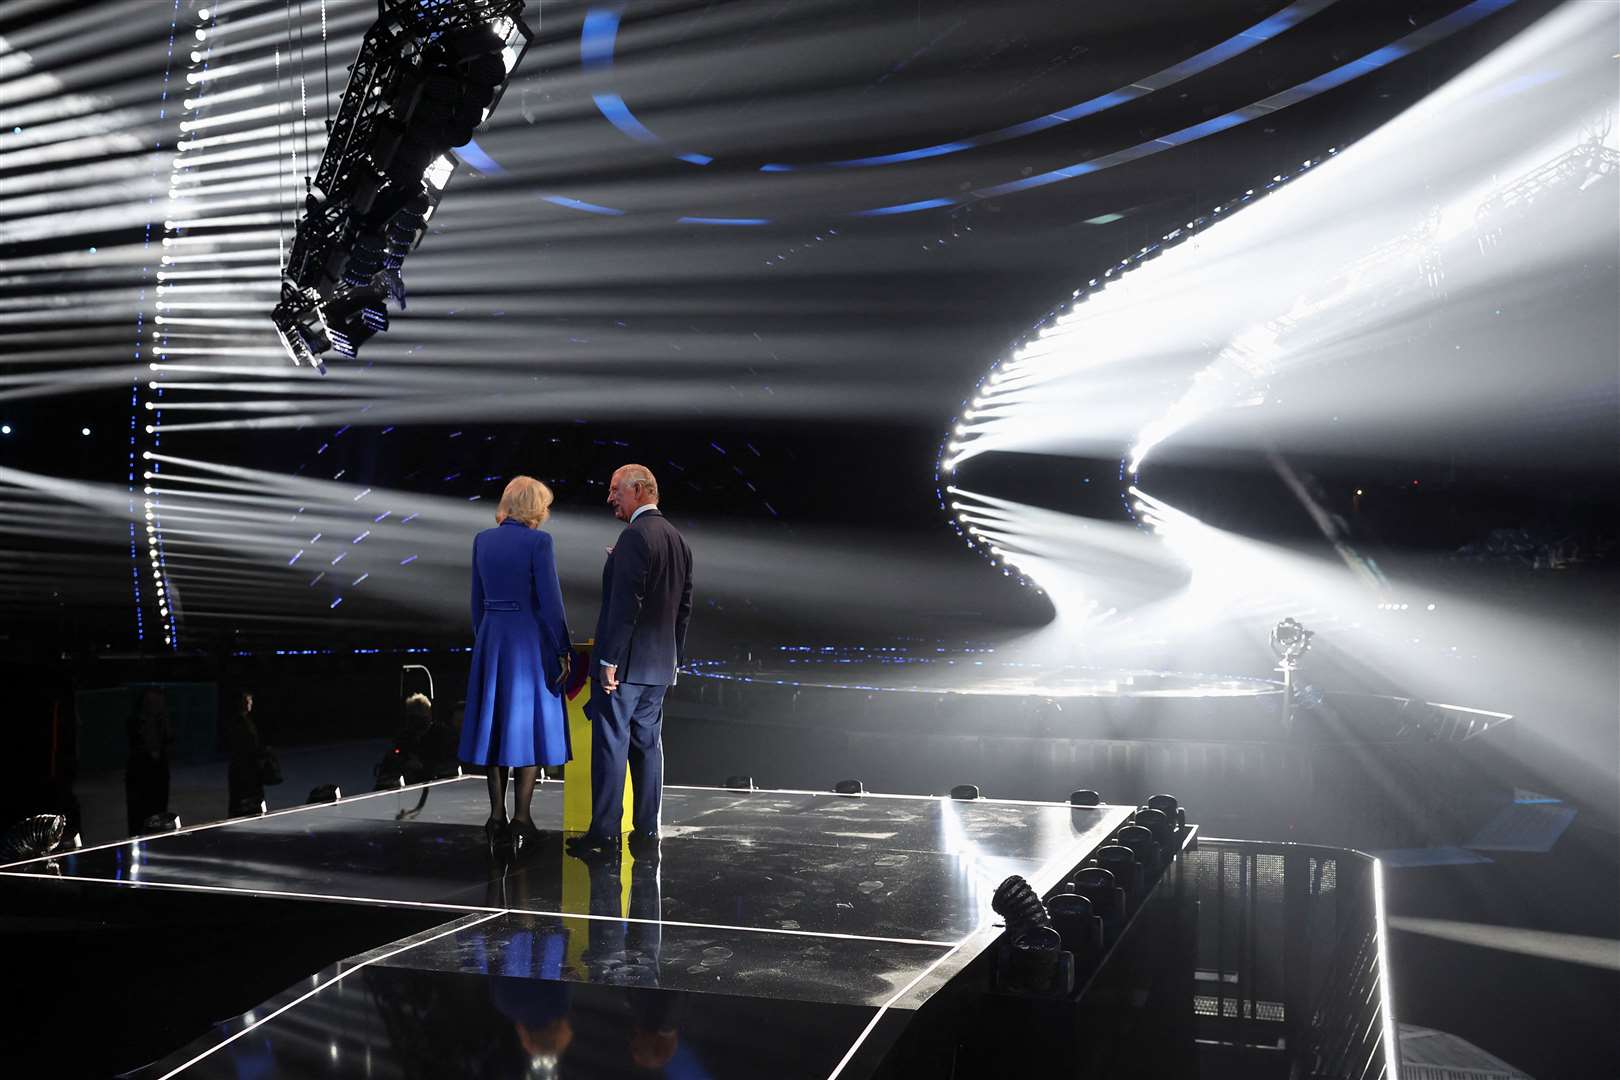 The King and the Queen Consort stand on the stage after switching on the stage lighting, during a visit to the M and S Bank Arena, the host venue of this year’s Eurovision Song Contest (Phil Noble/PA)